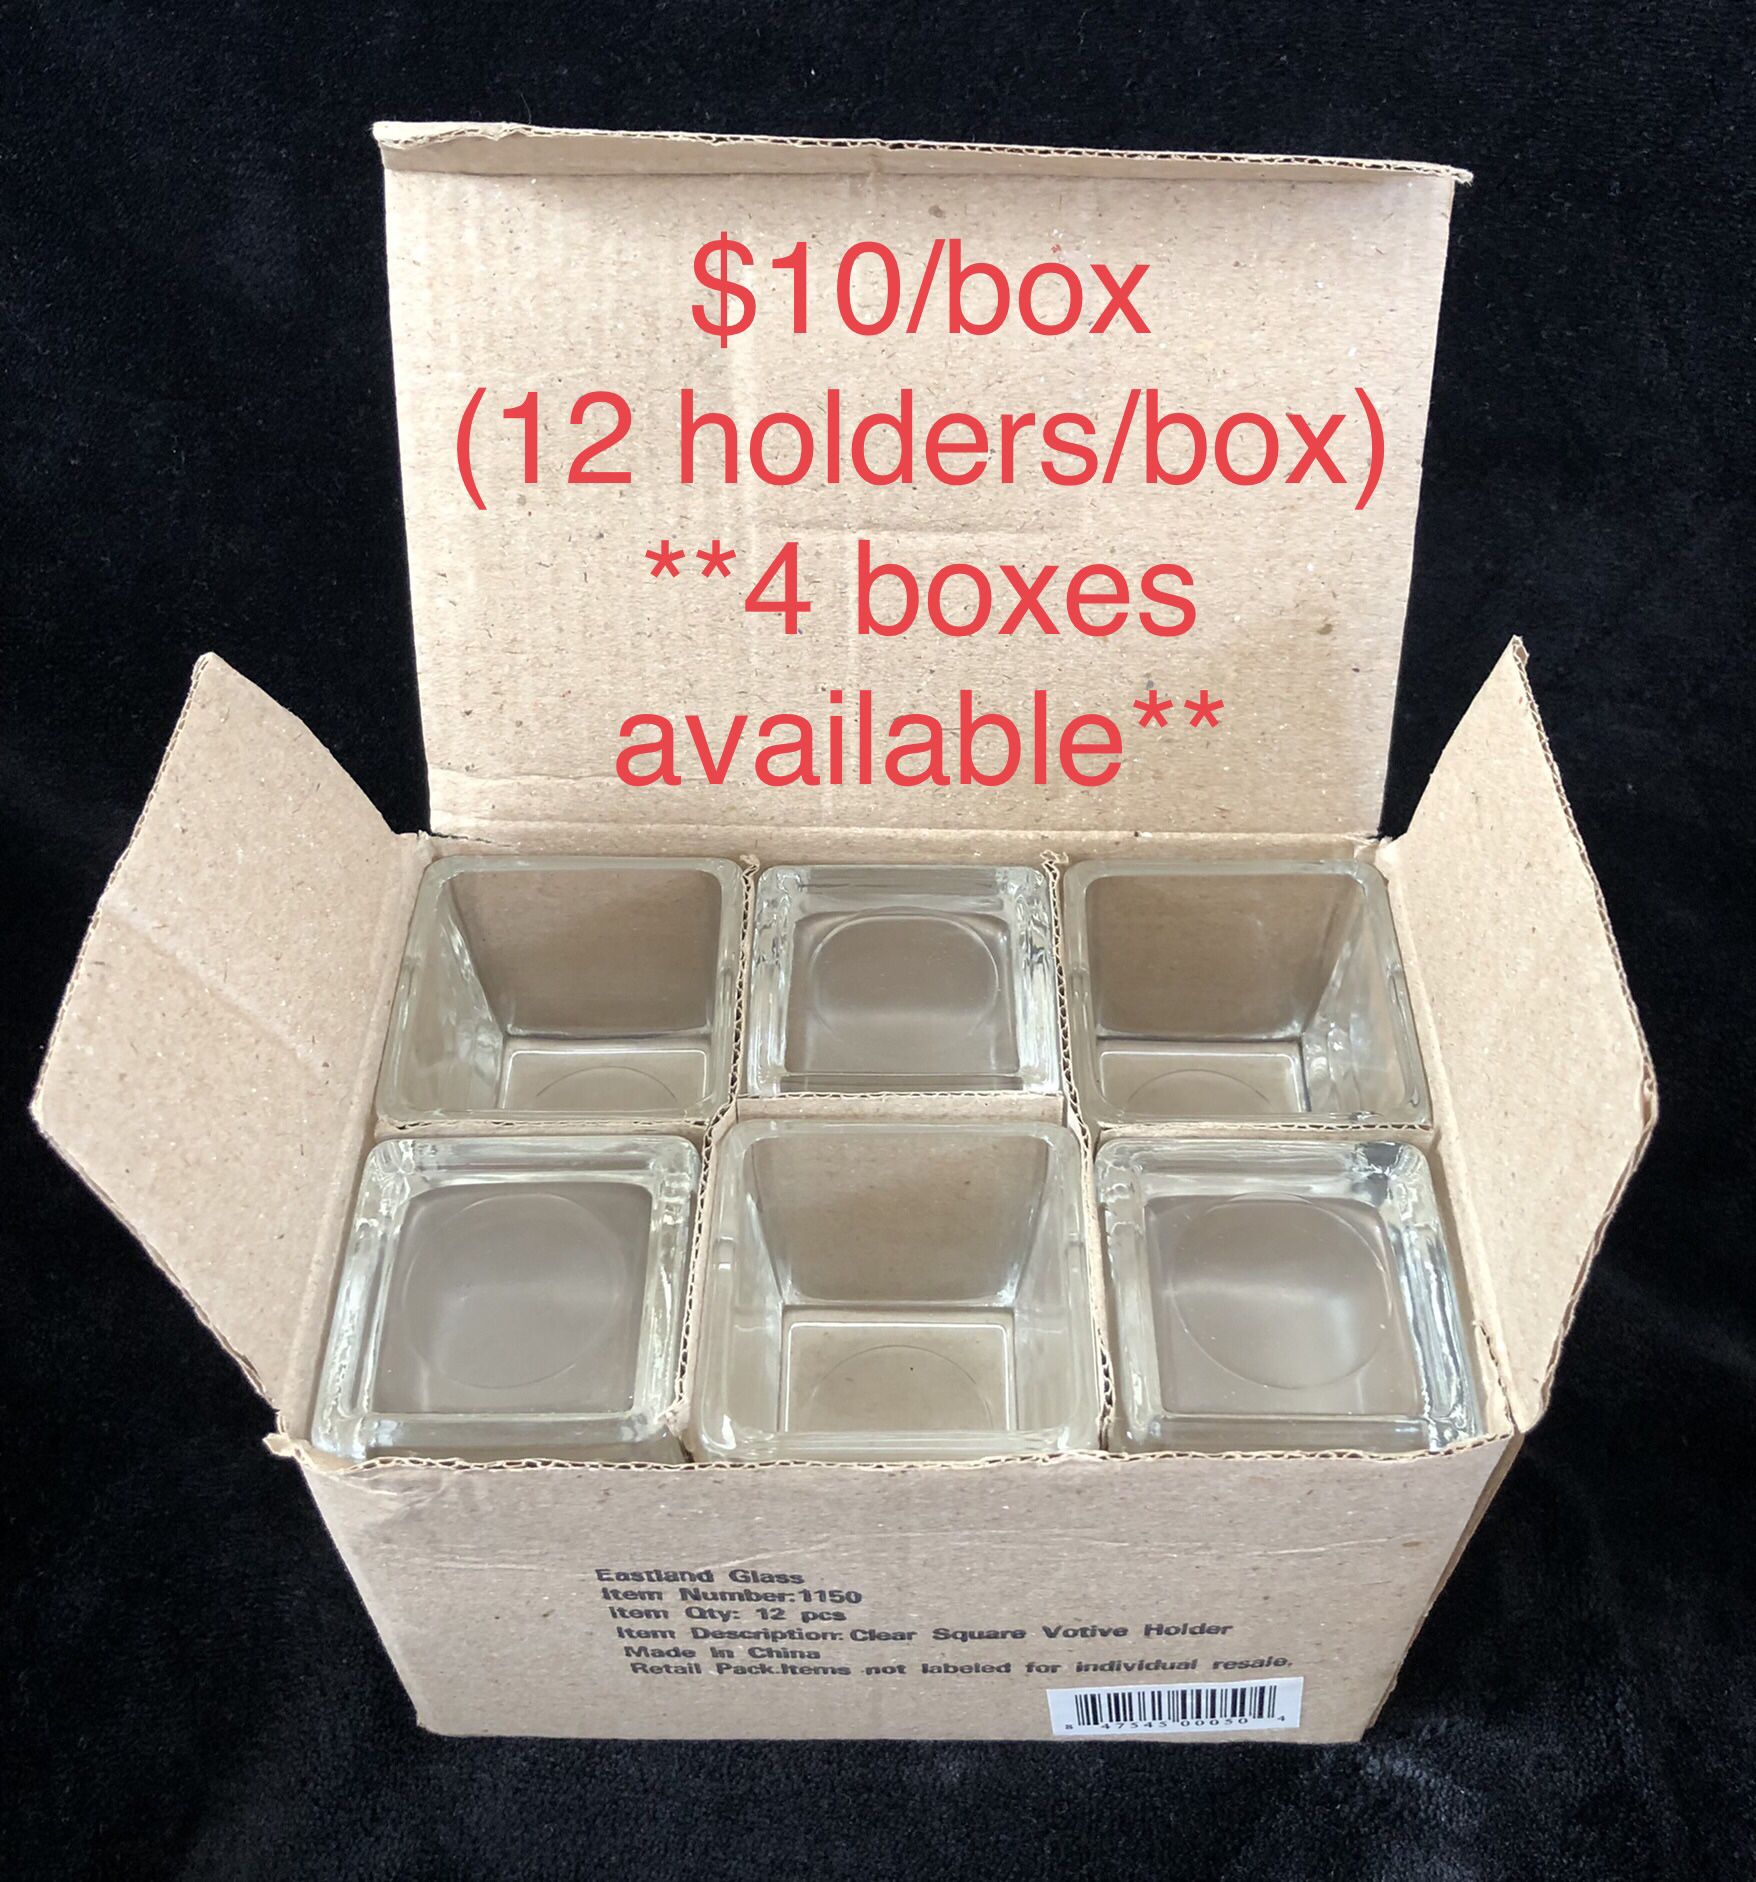 Votive Holders / Tea Light Holders NEW IN BOX (12/box) / Eastland Clear Square Votive Holders / Candle Holders / Tealight